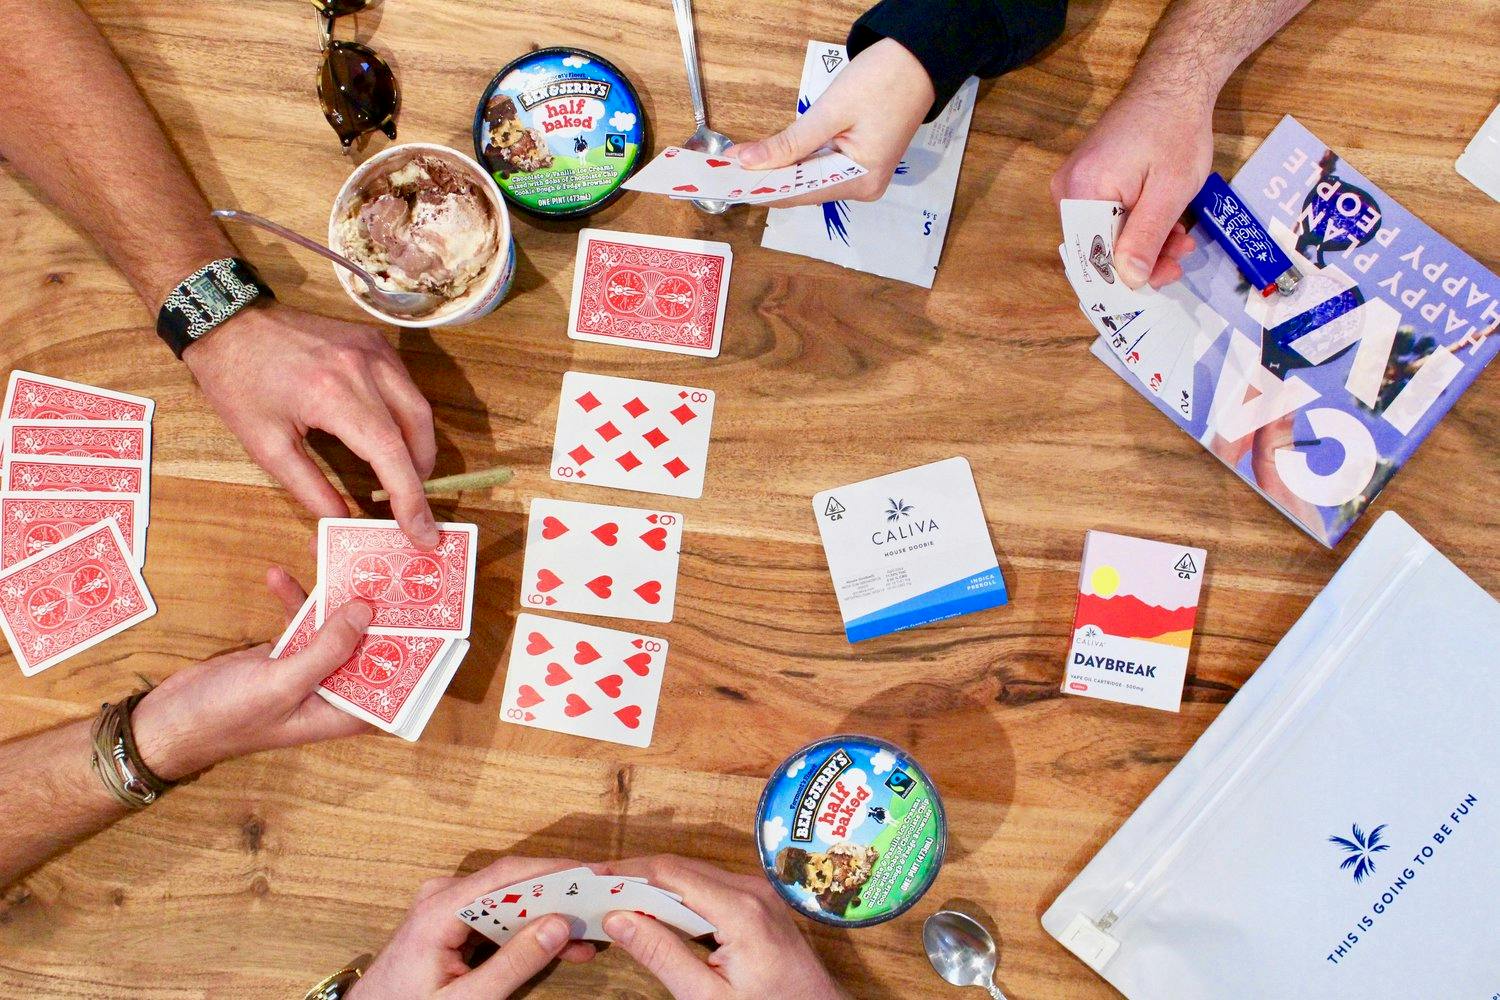 Playing cards with ben & jerry's and cannabis